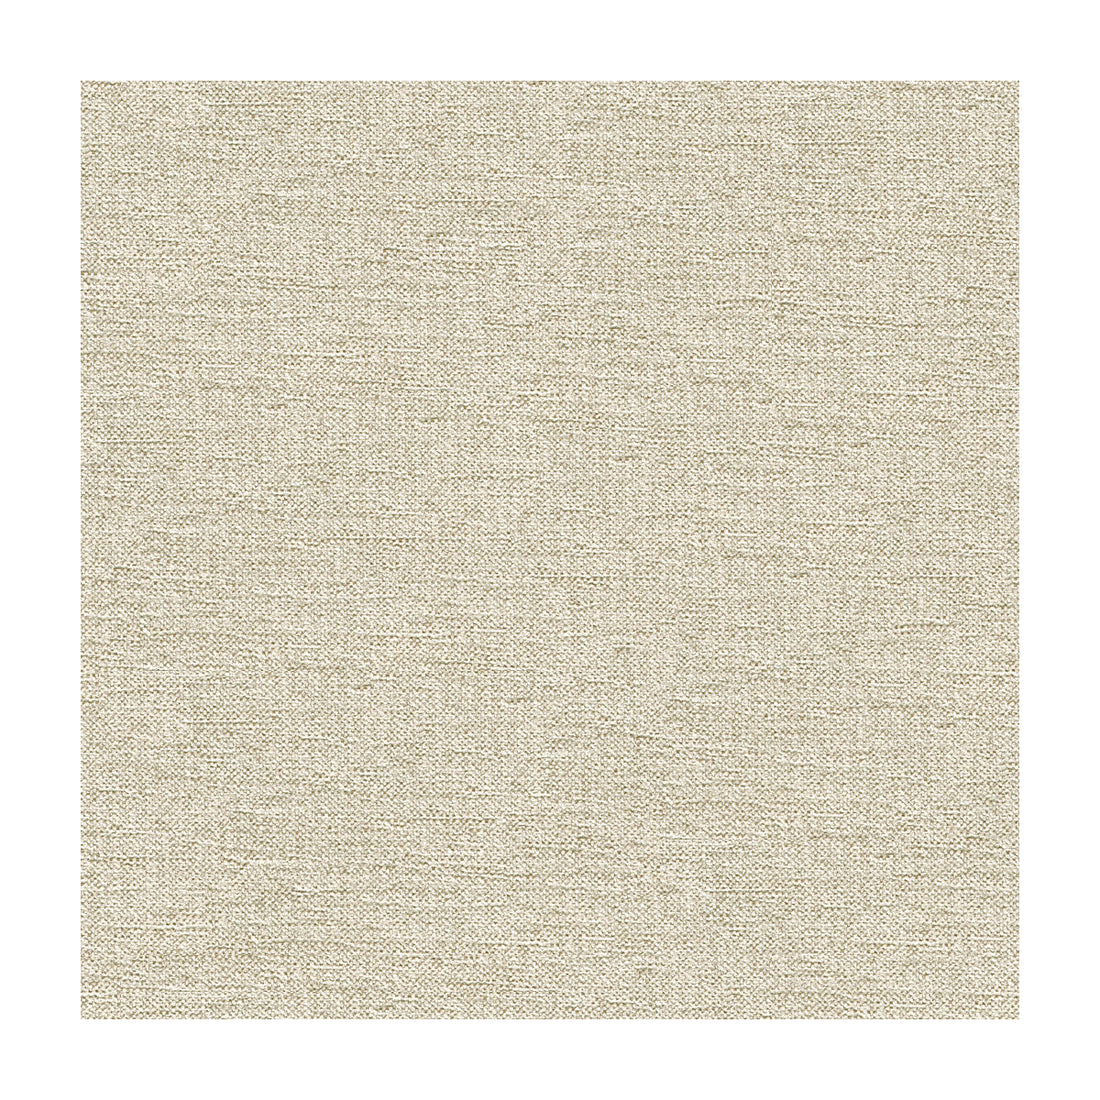 Kravet Smart fabric in 33831-1601 color - pattern 33831.1601.0 - by Kravet Smart in the Performance Crypton Home collection